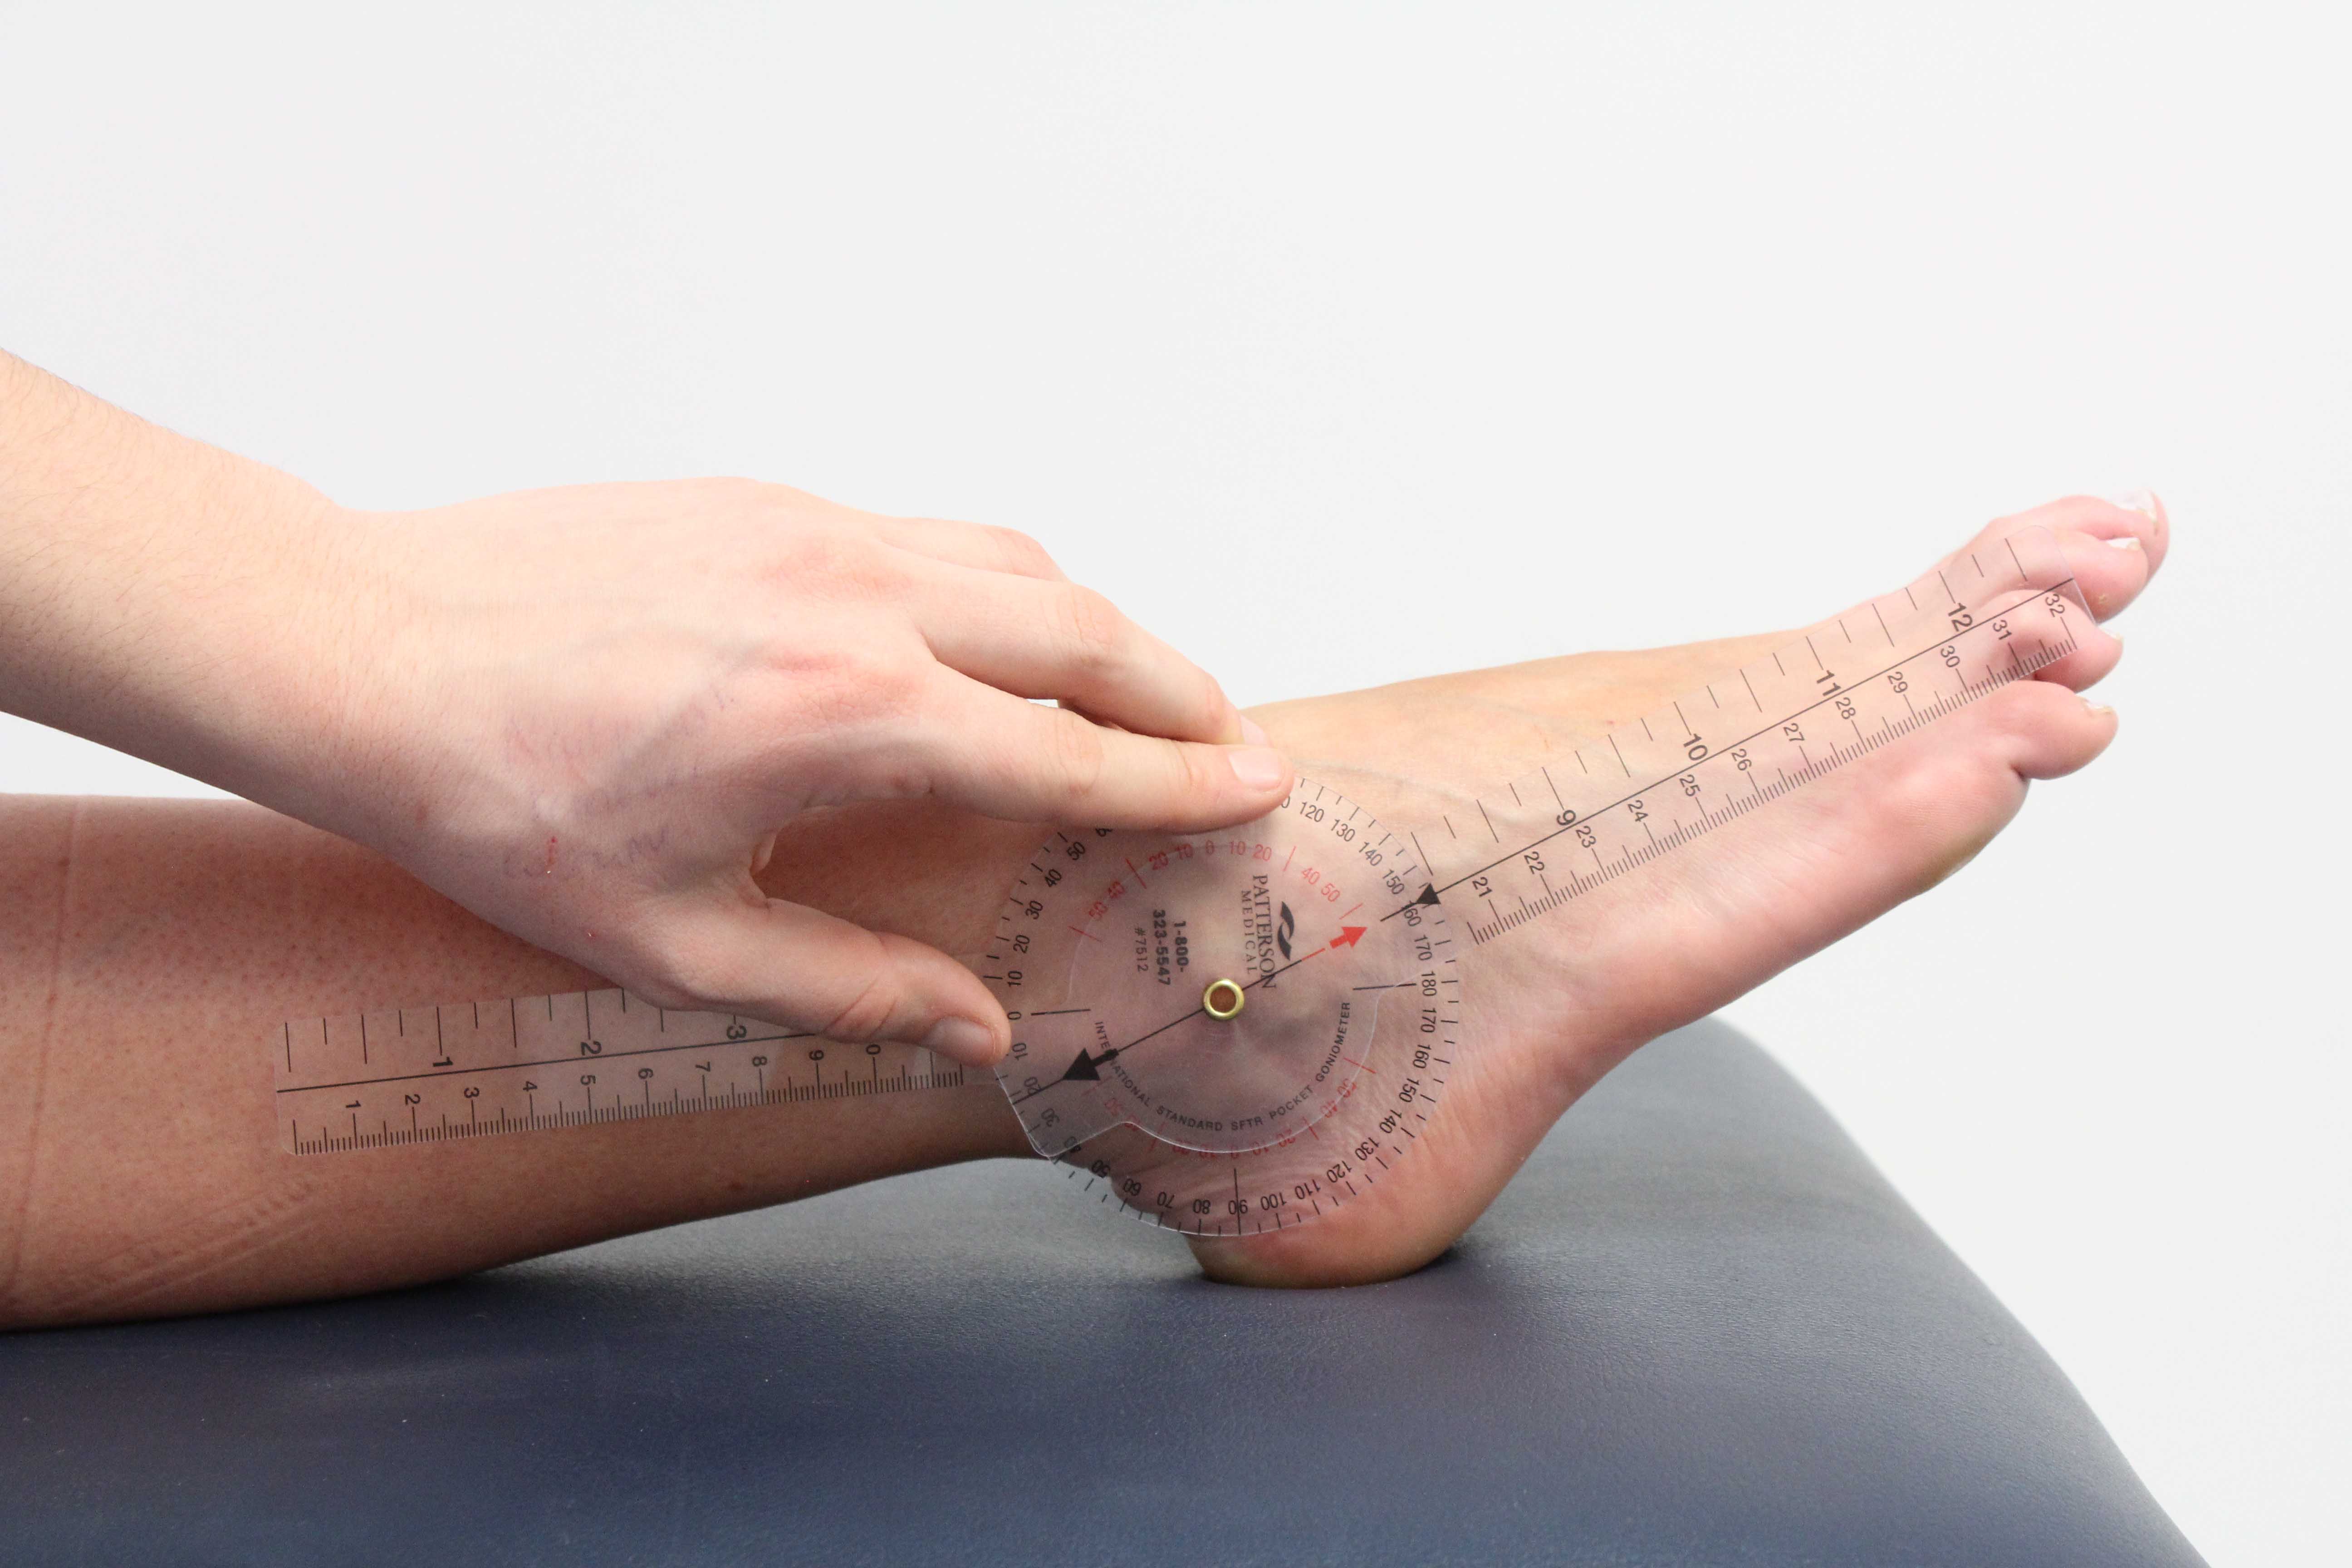 Assessment of the foot and ankle using a goniometer